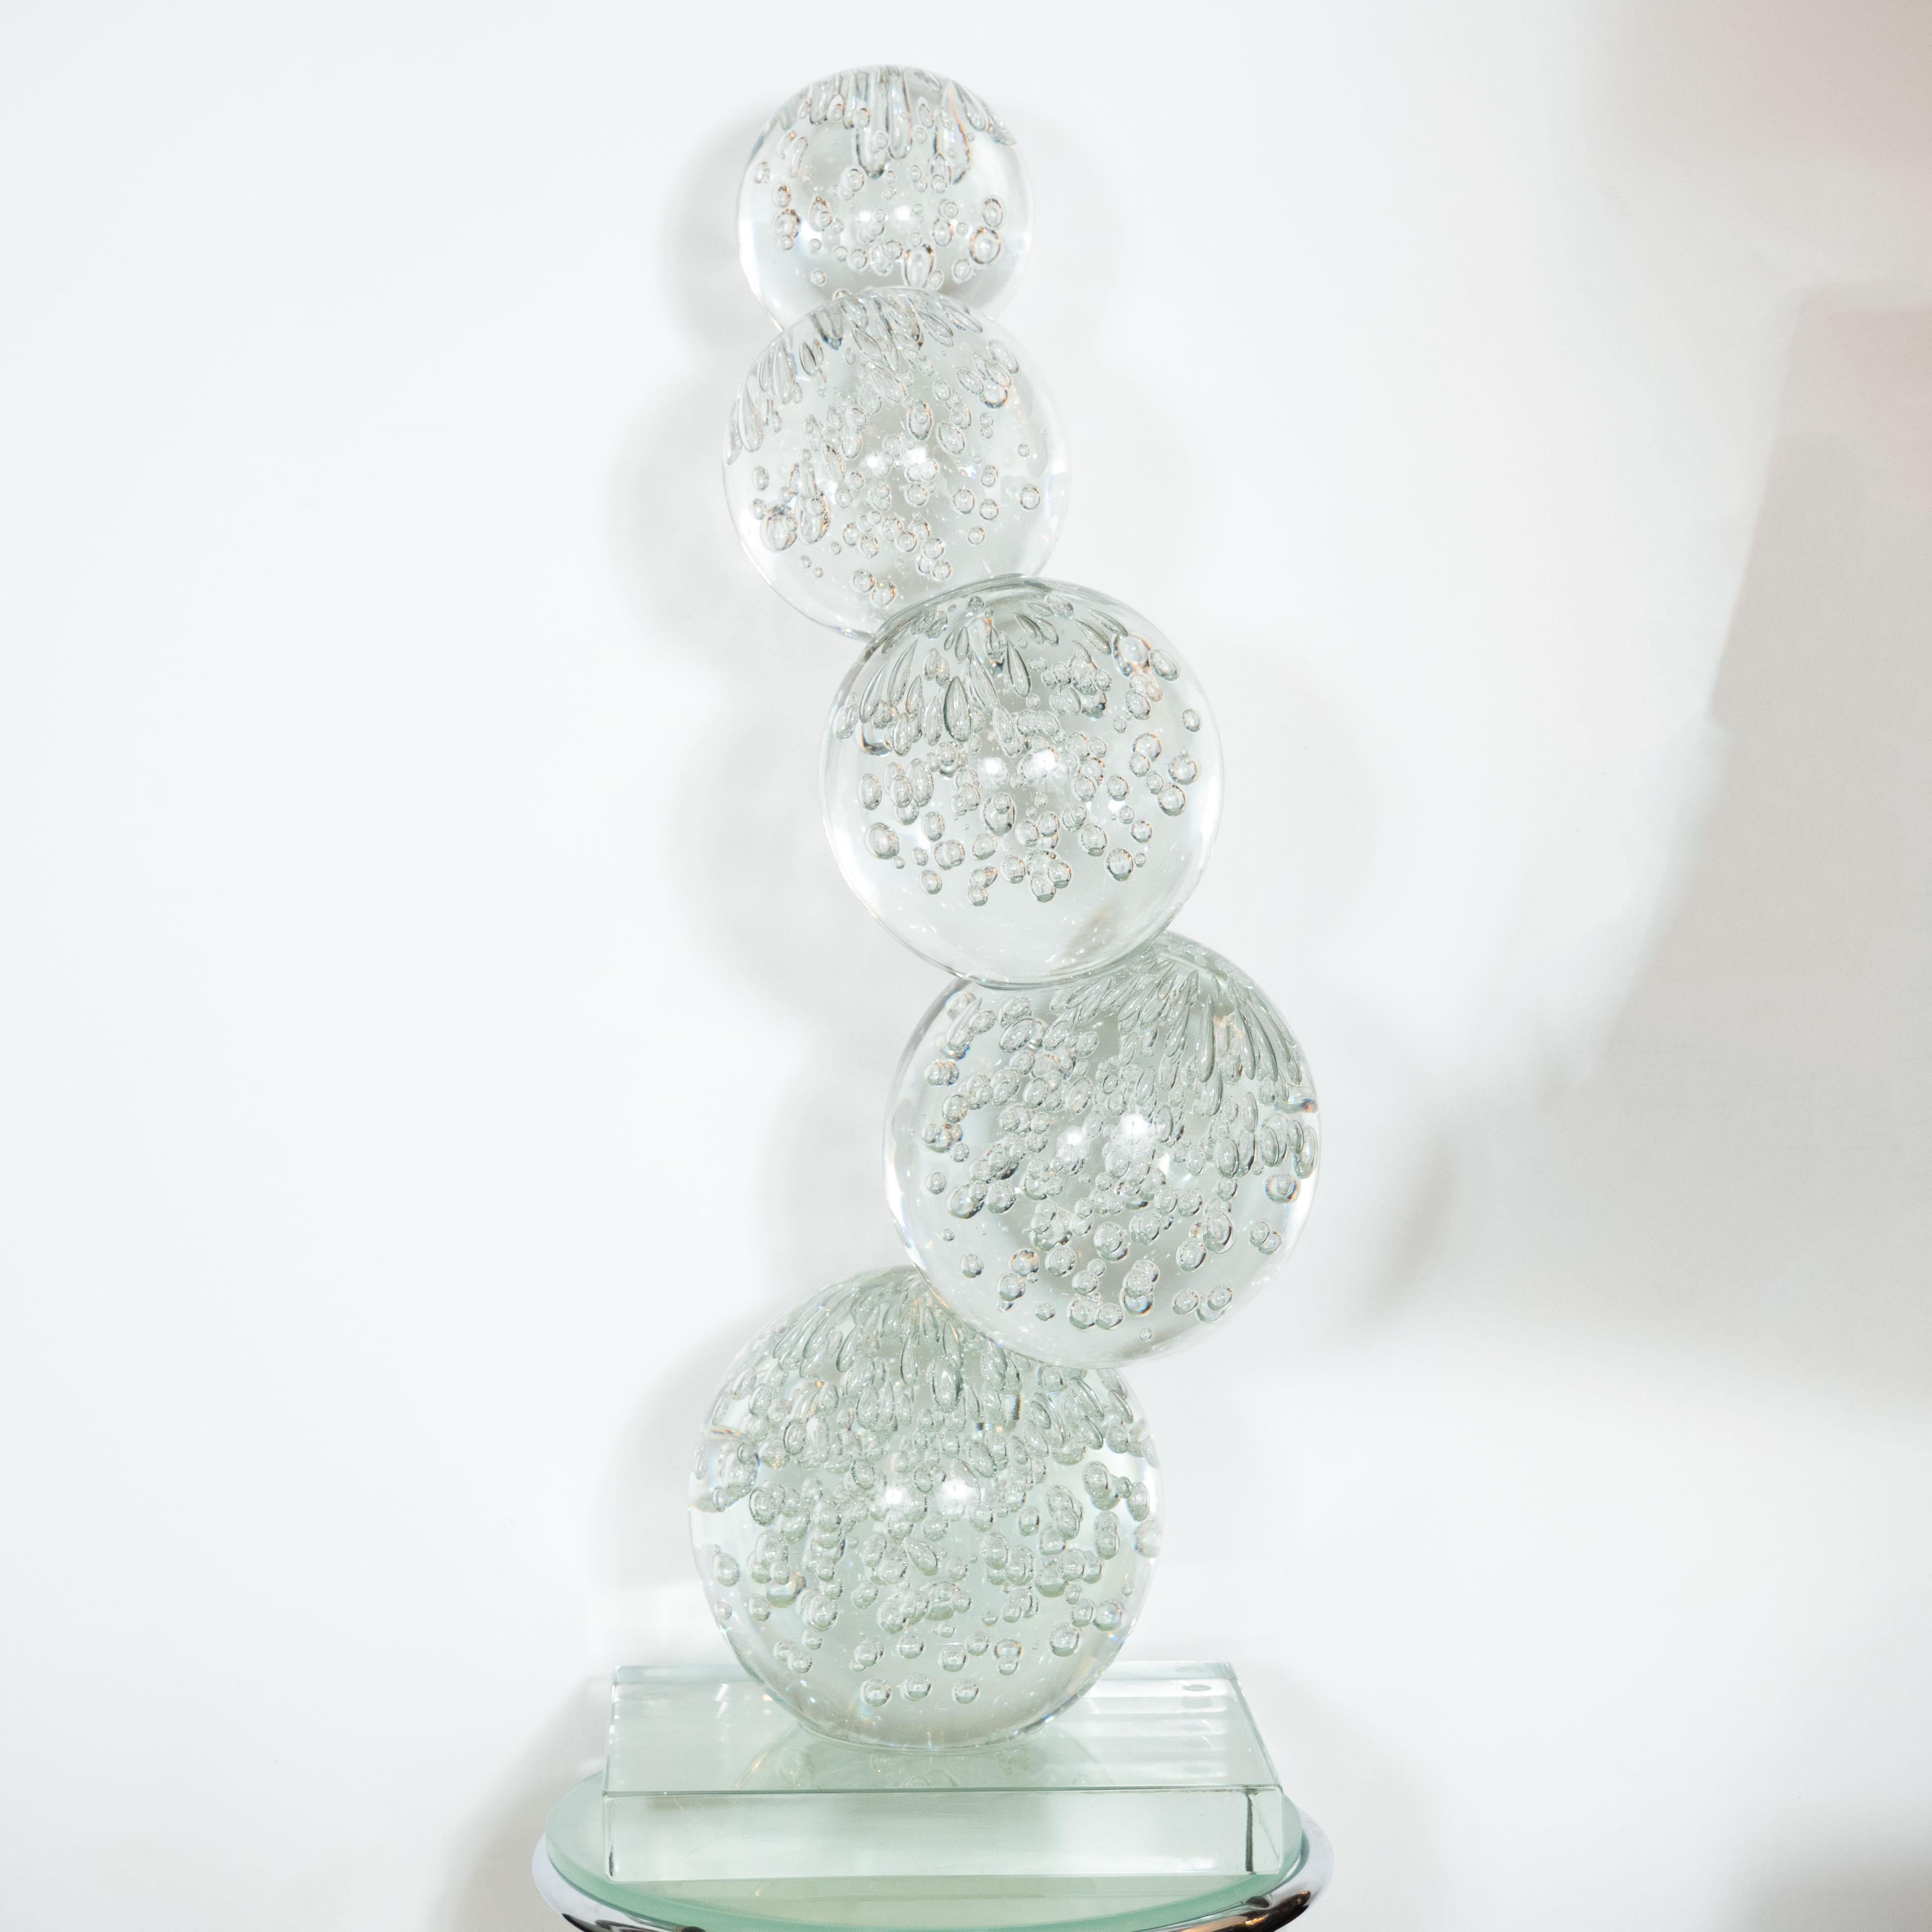 Murano Glass Modernist Hand Blown Murano Translucent Bubble Glass Stacked Spheres Sculpture